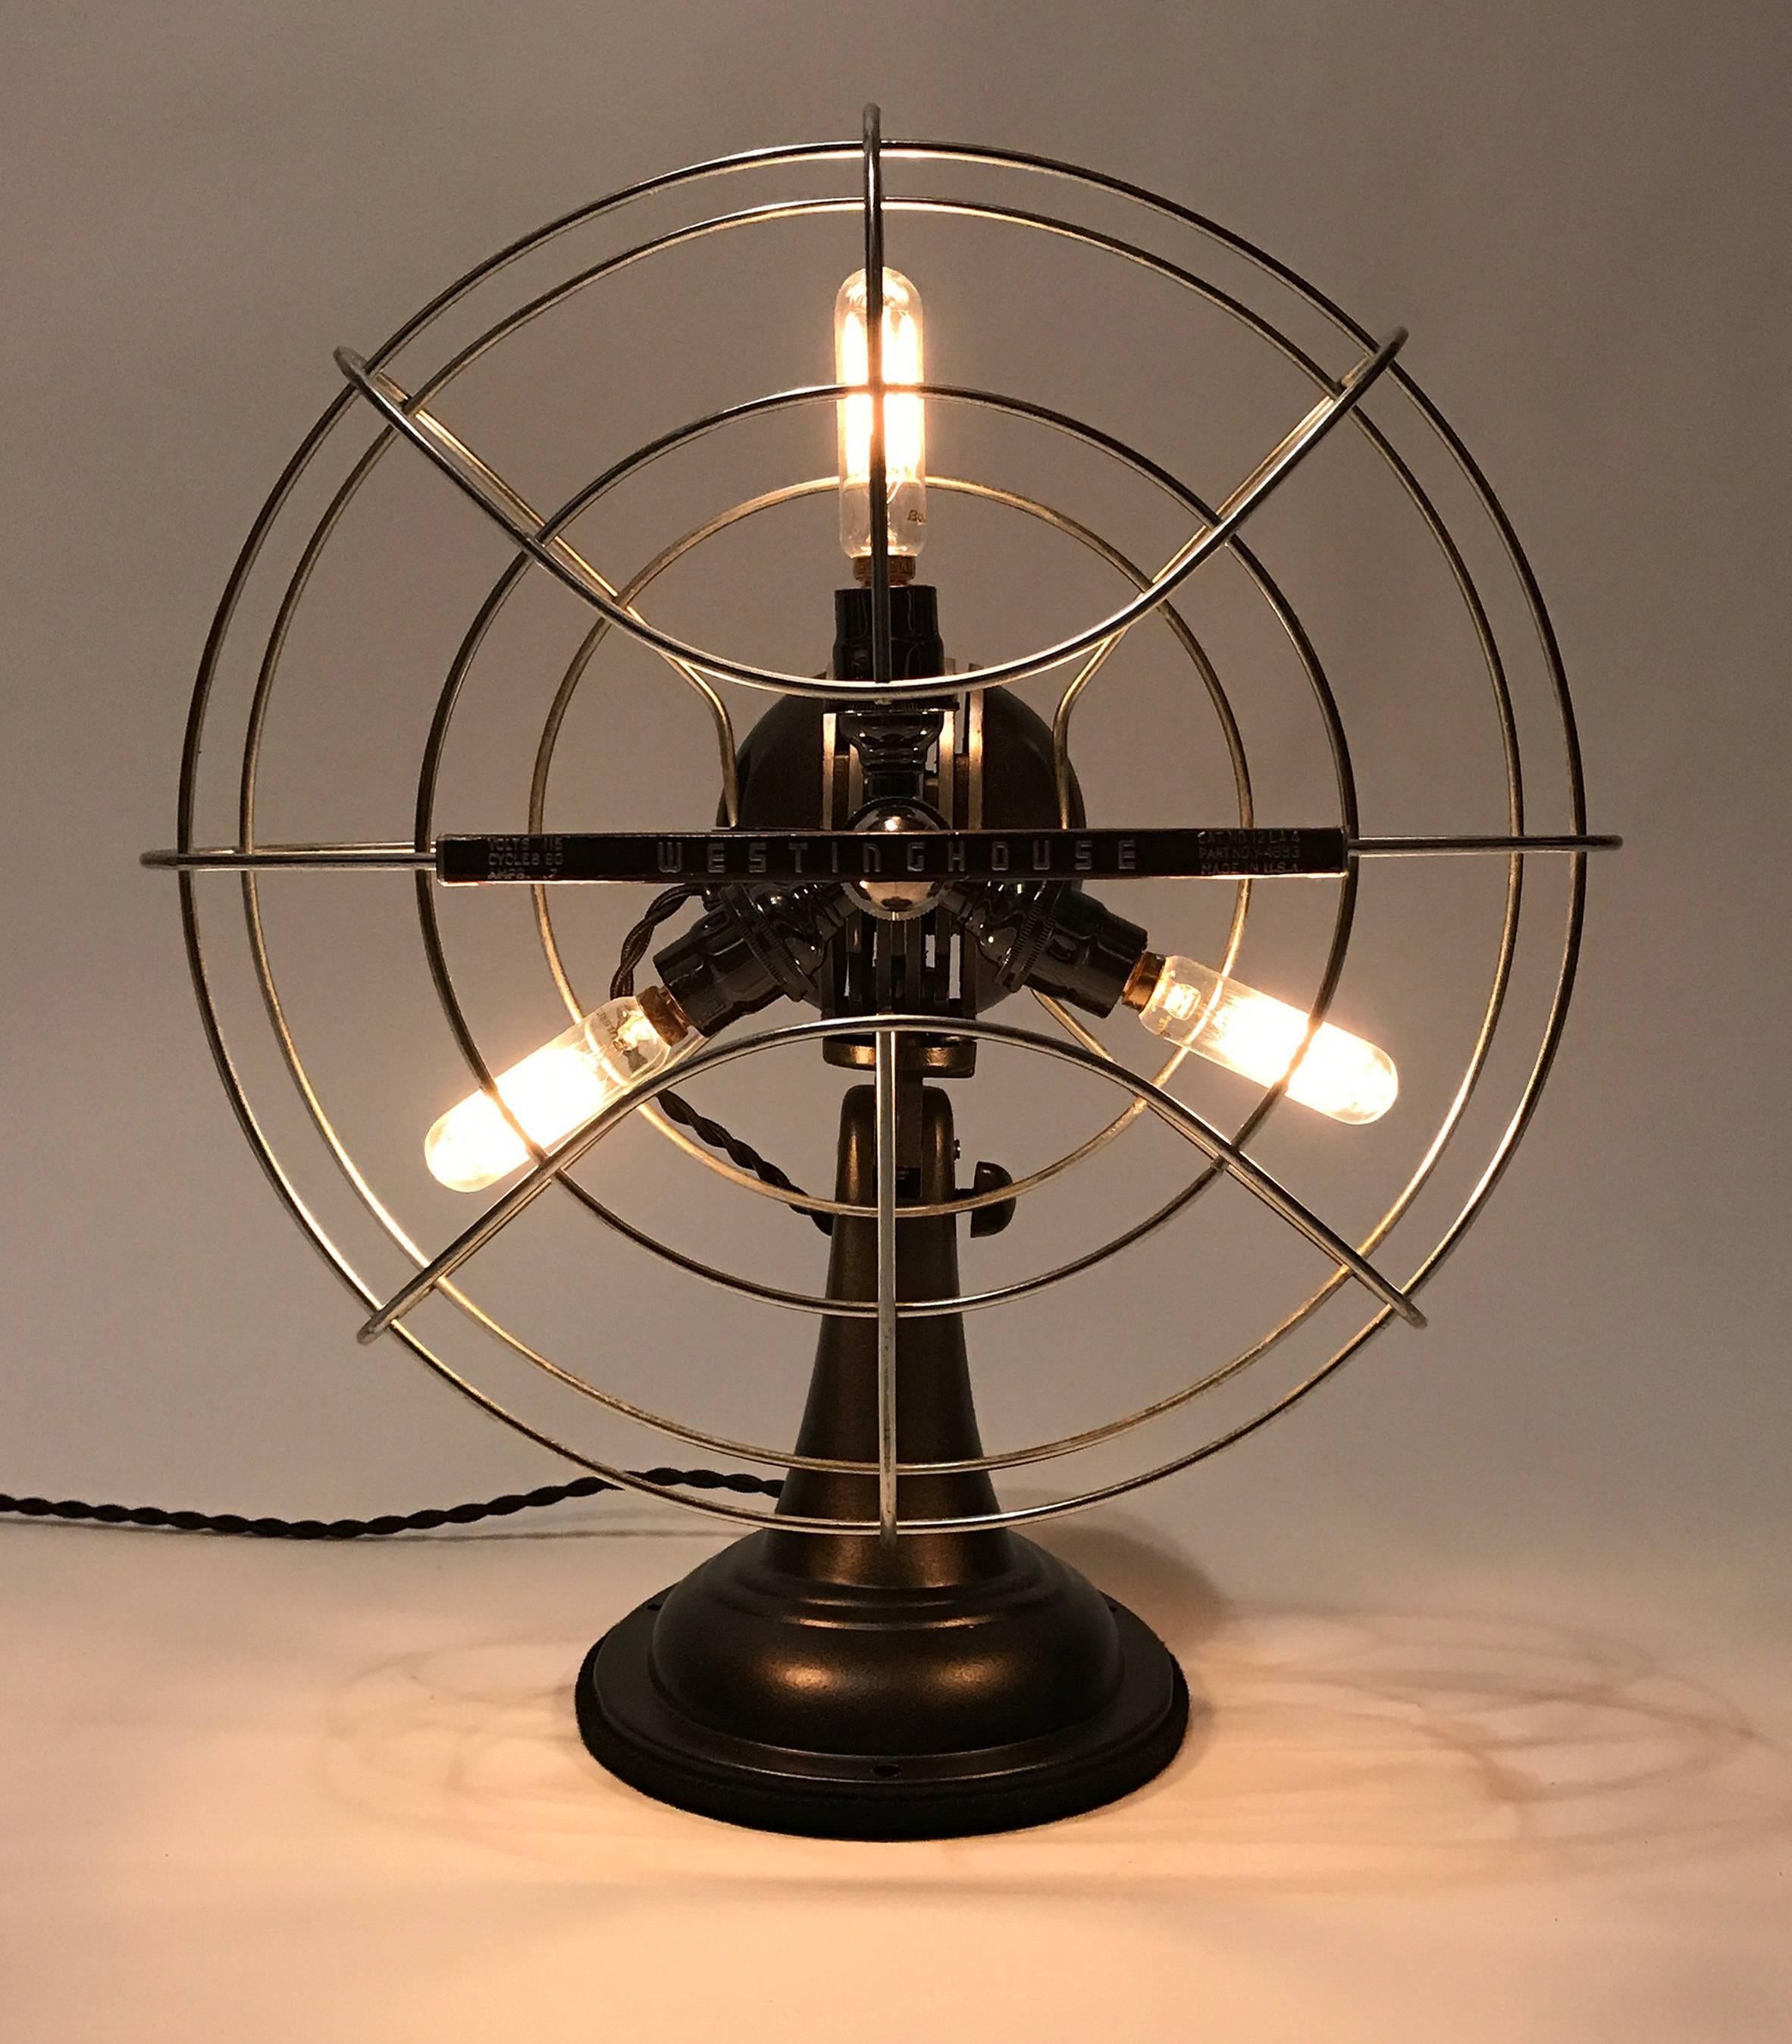 Vintage 12" Westinghouse fan repurposed as a lamp. The metal housing has been meticulously refinished and restored. 

Painted metal and oil-rubbed bronze with chrome accents. Wired professionally by a licensed electrician with all UL listed